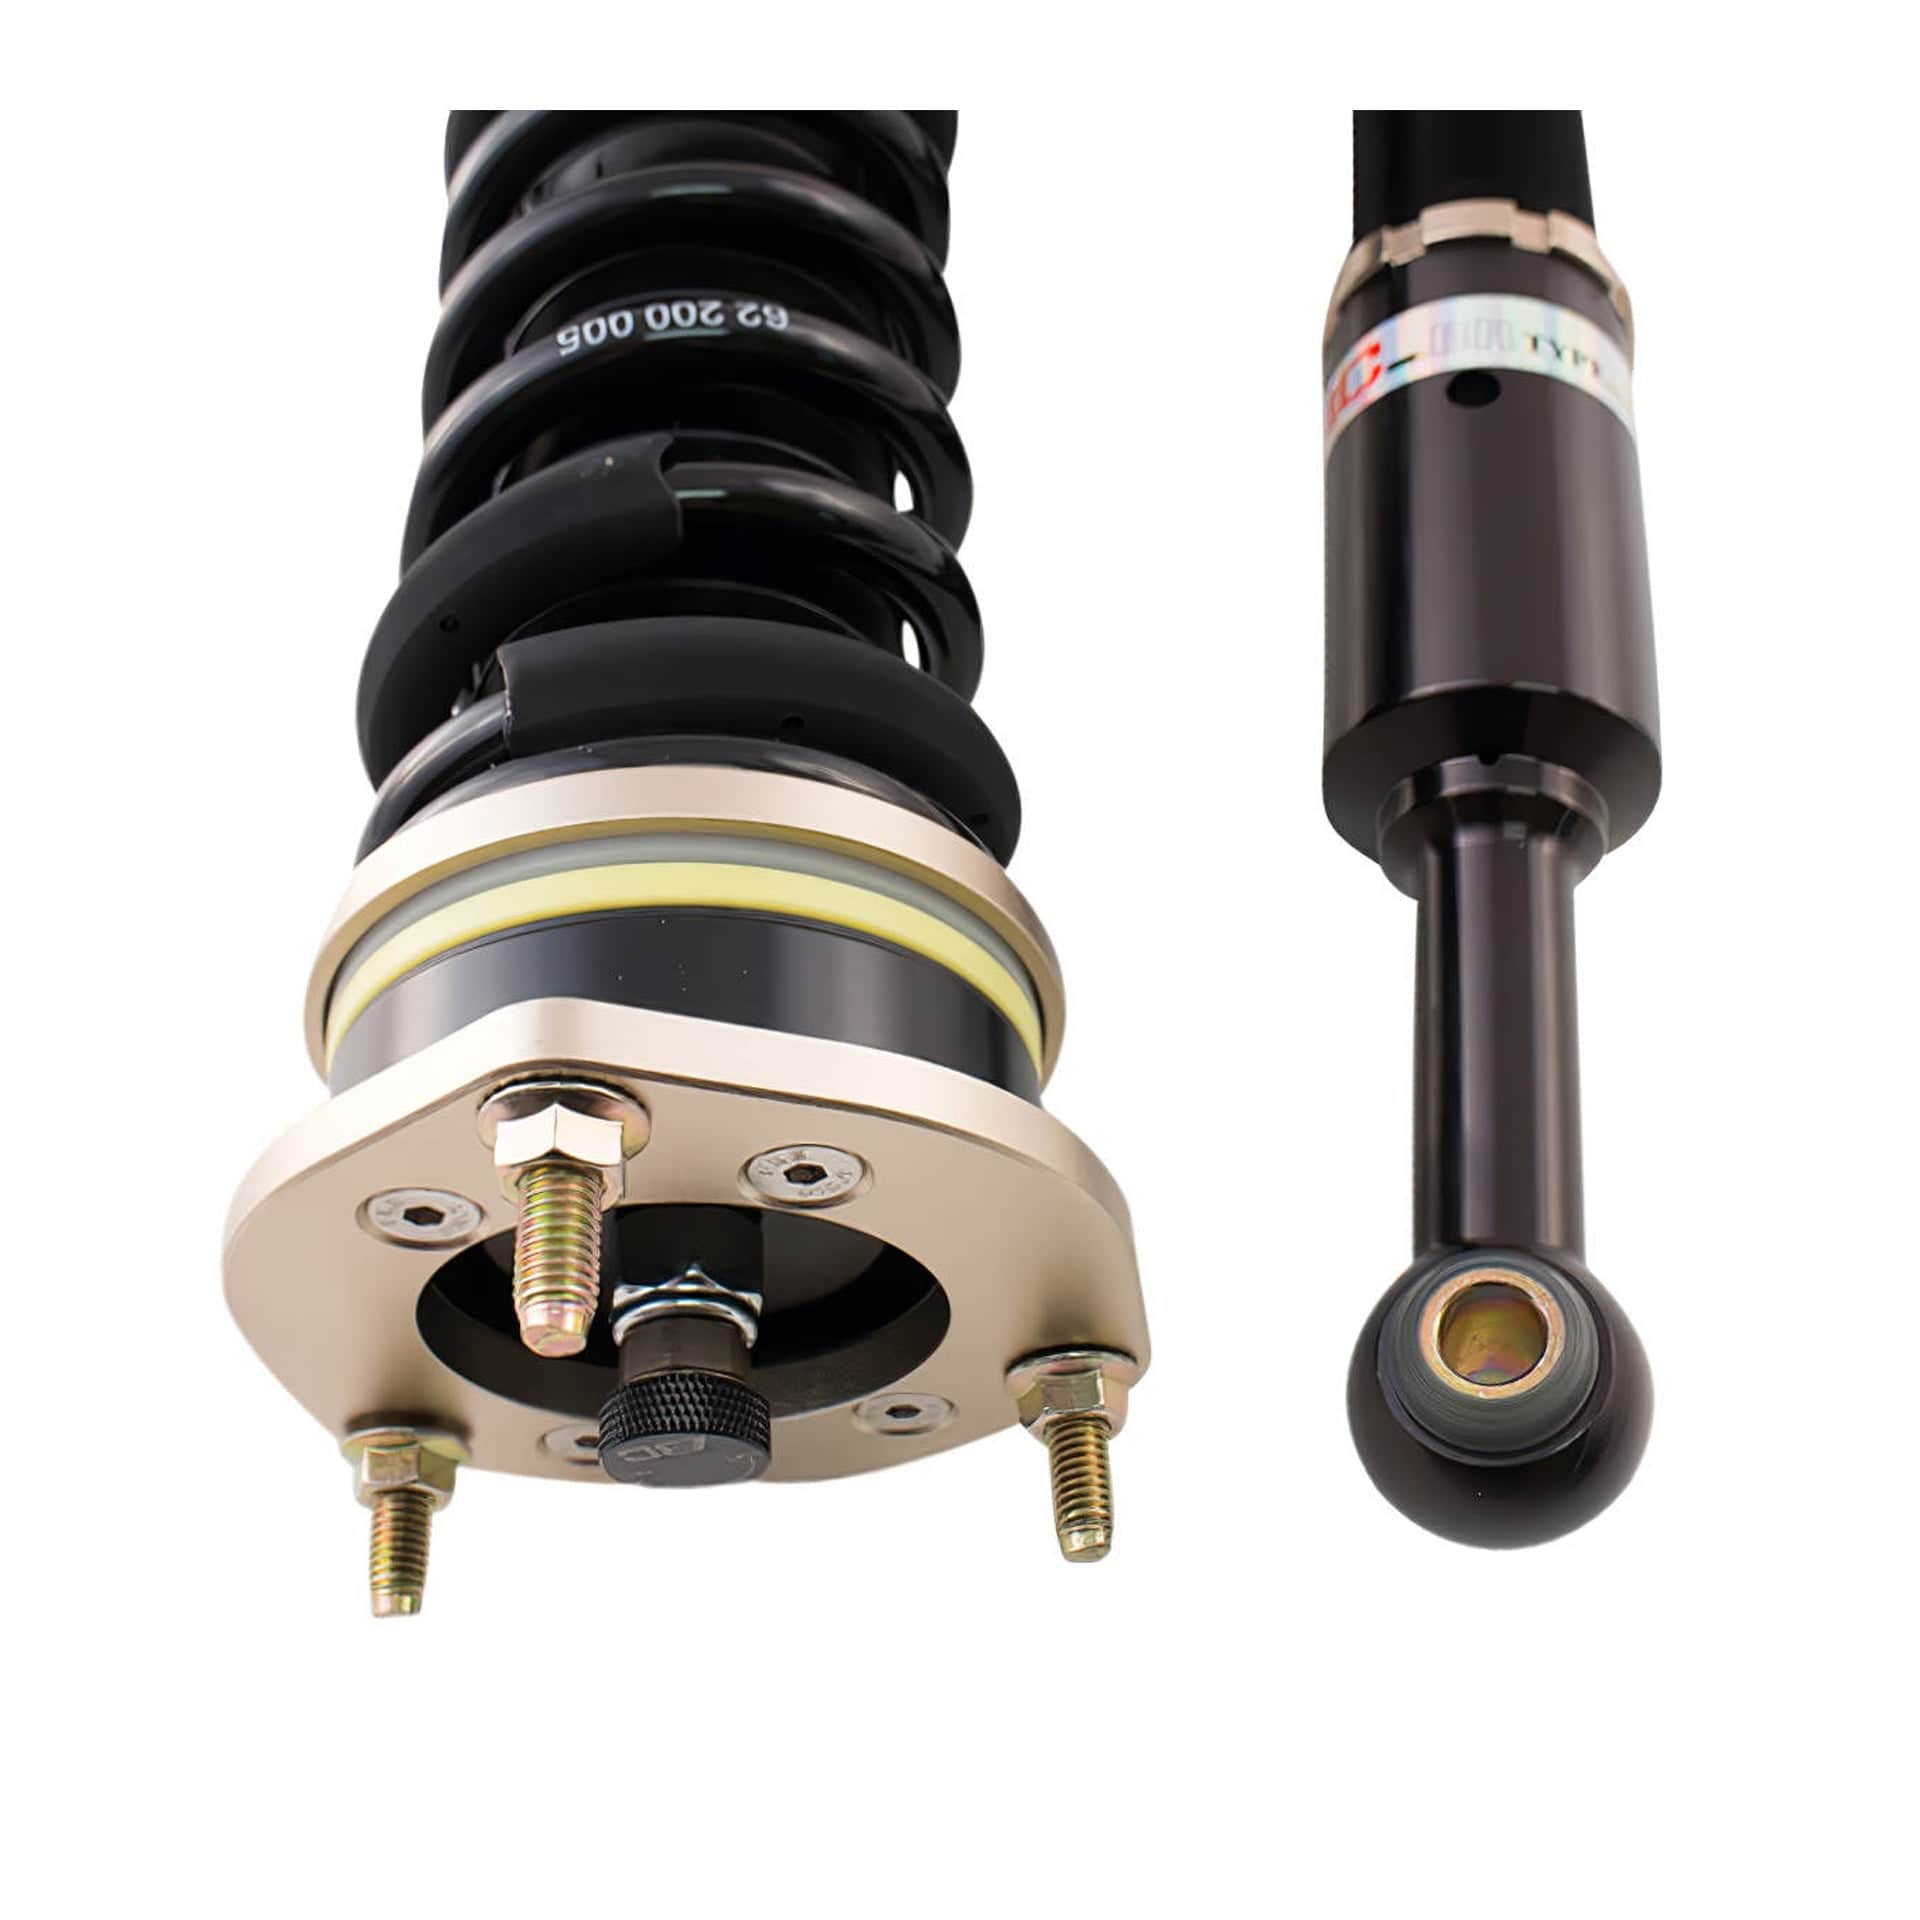 BC Racing BR Series Coilovers - 2011-2019 Ford Fiesta (MK6)